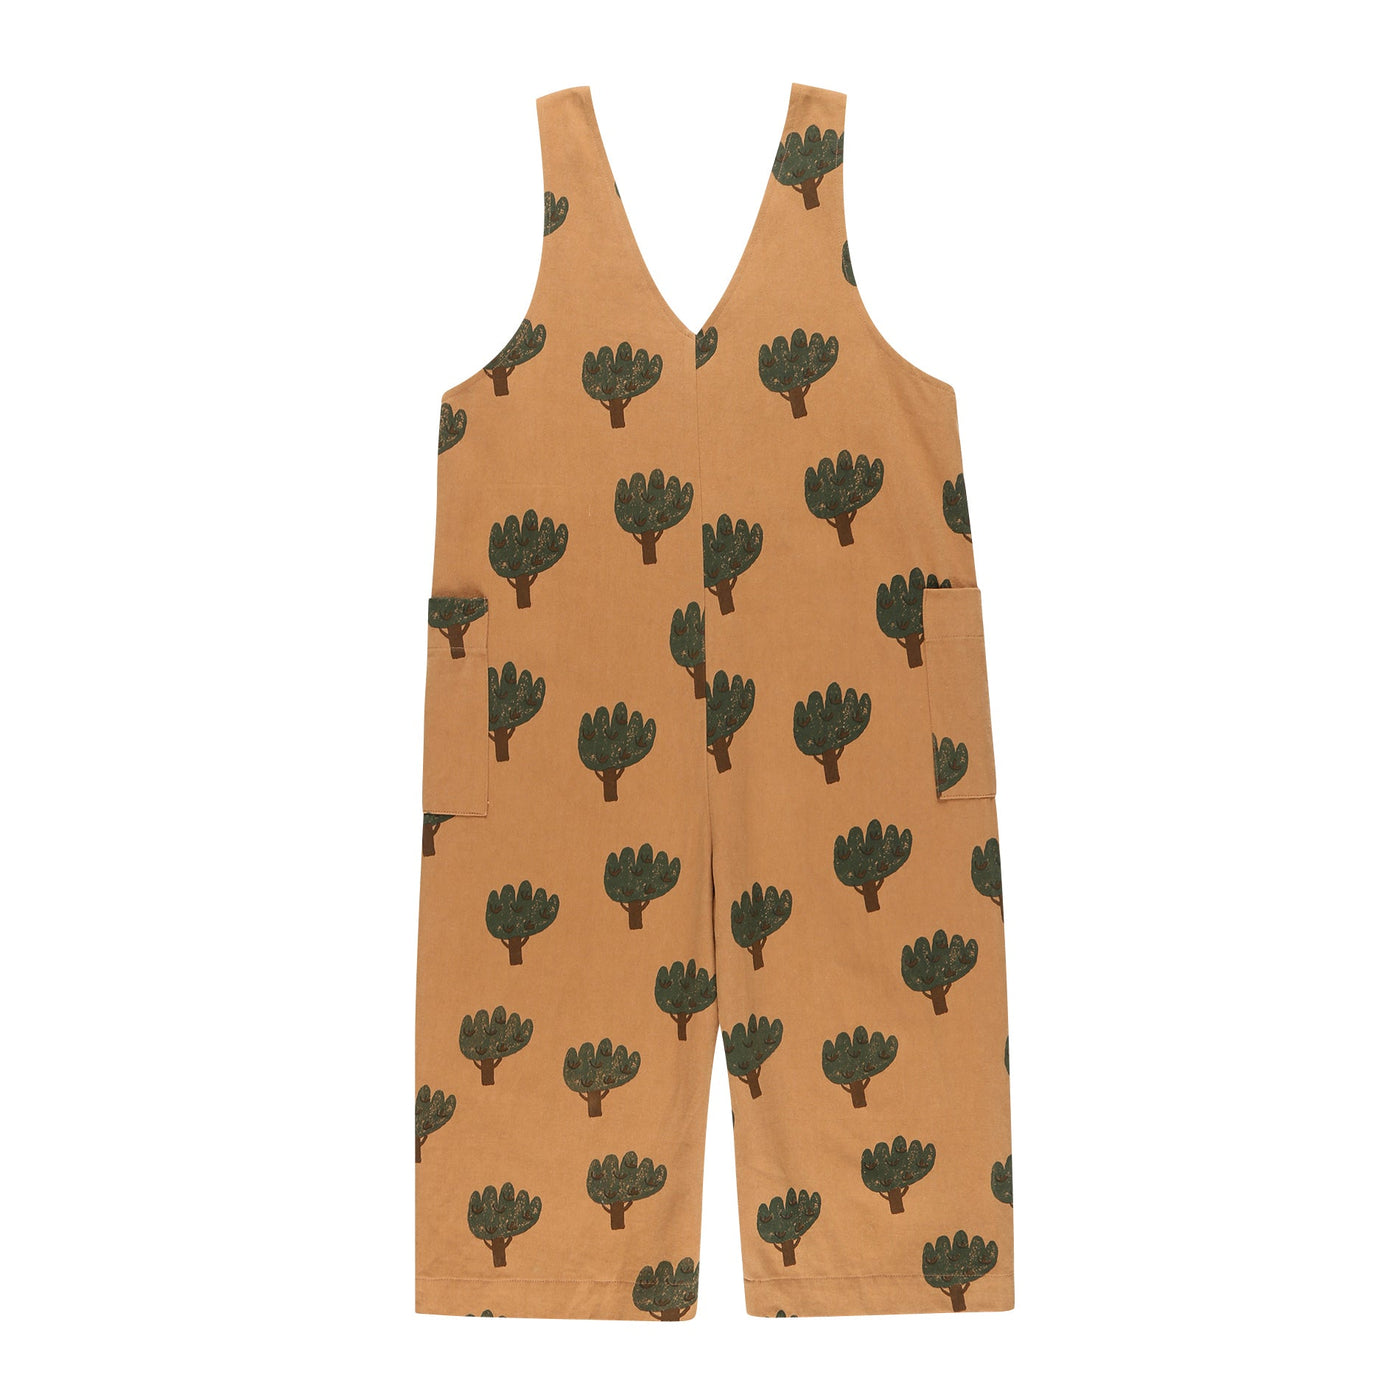 Tree Overalls by Jelly Mallow - Petite Belle